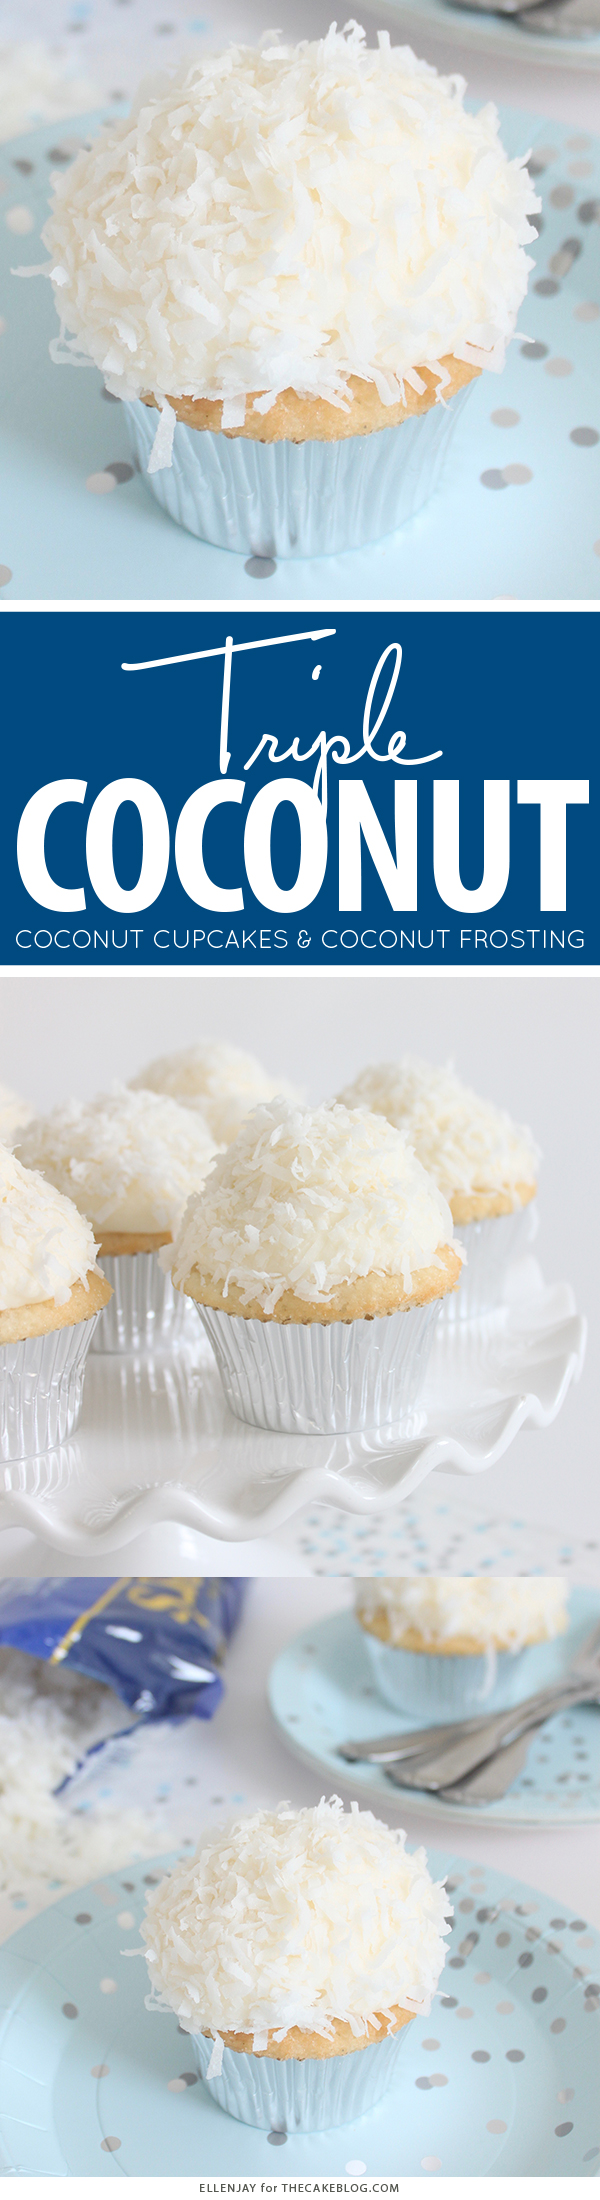 Coconut Cupcakes - fluffy coconut cupcakes made with coconut milk and topped with smooth coconut buttercream and coconut flakes | by ellenJAY for TheCakeBlog.com